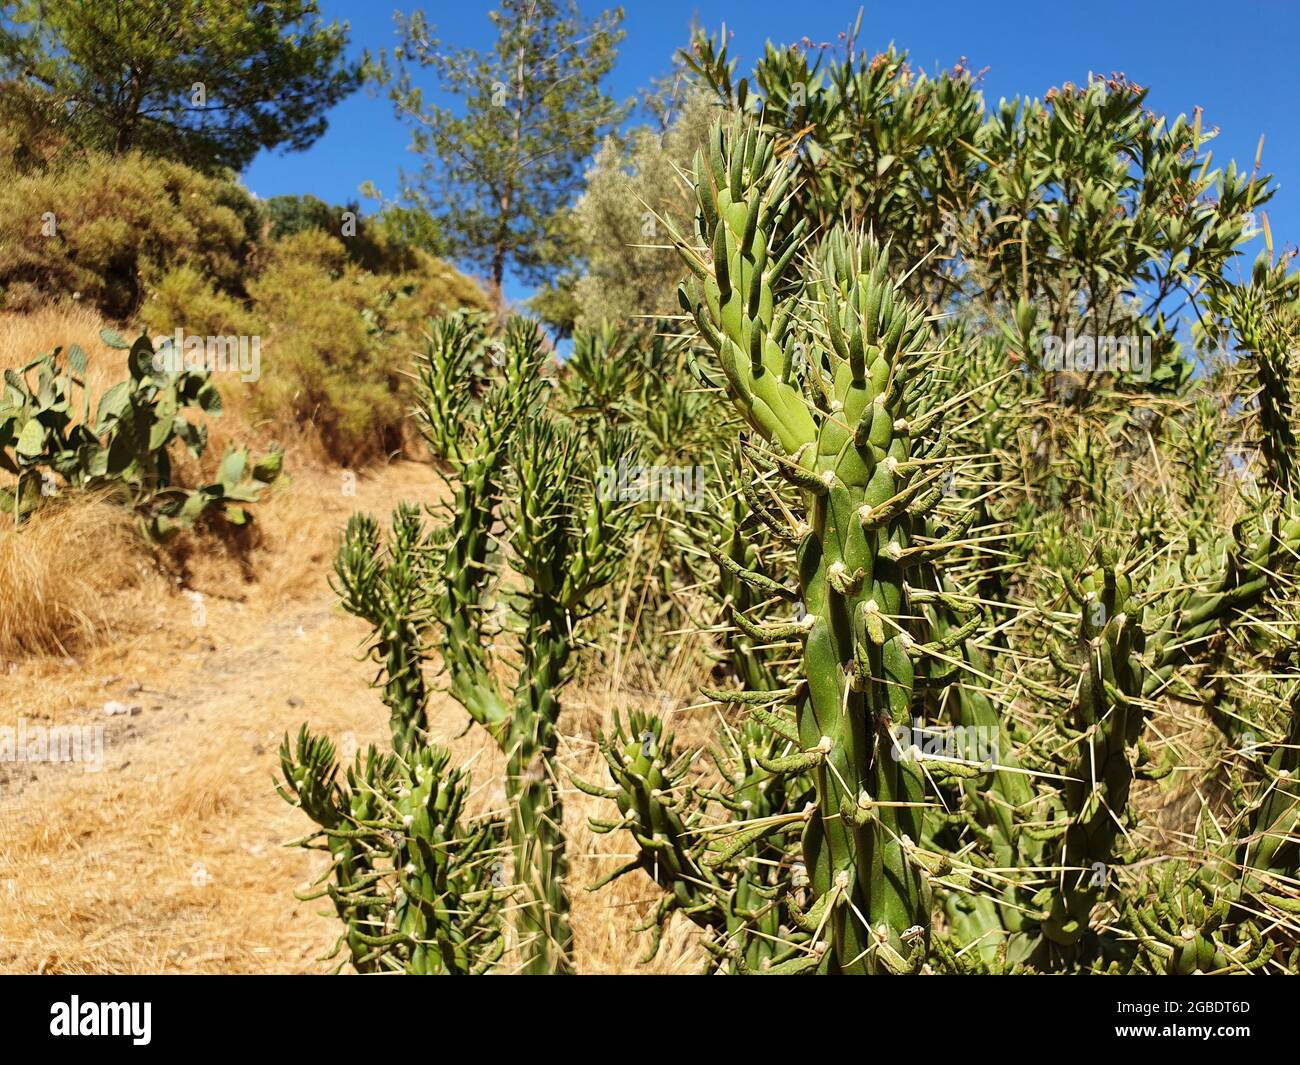 Cacti growing in a country with a hot climate. Beautiful, large and thorny plants. Stock Photo